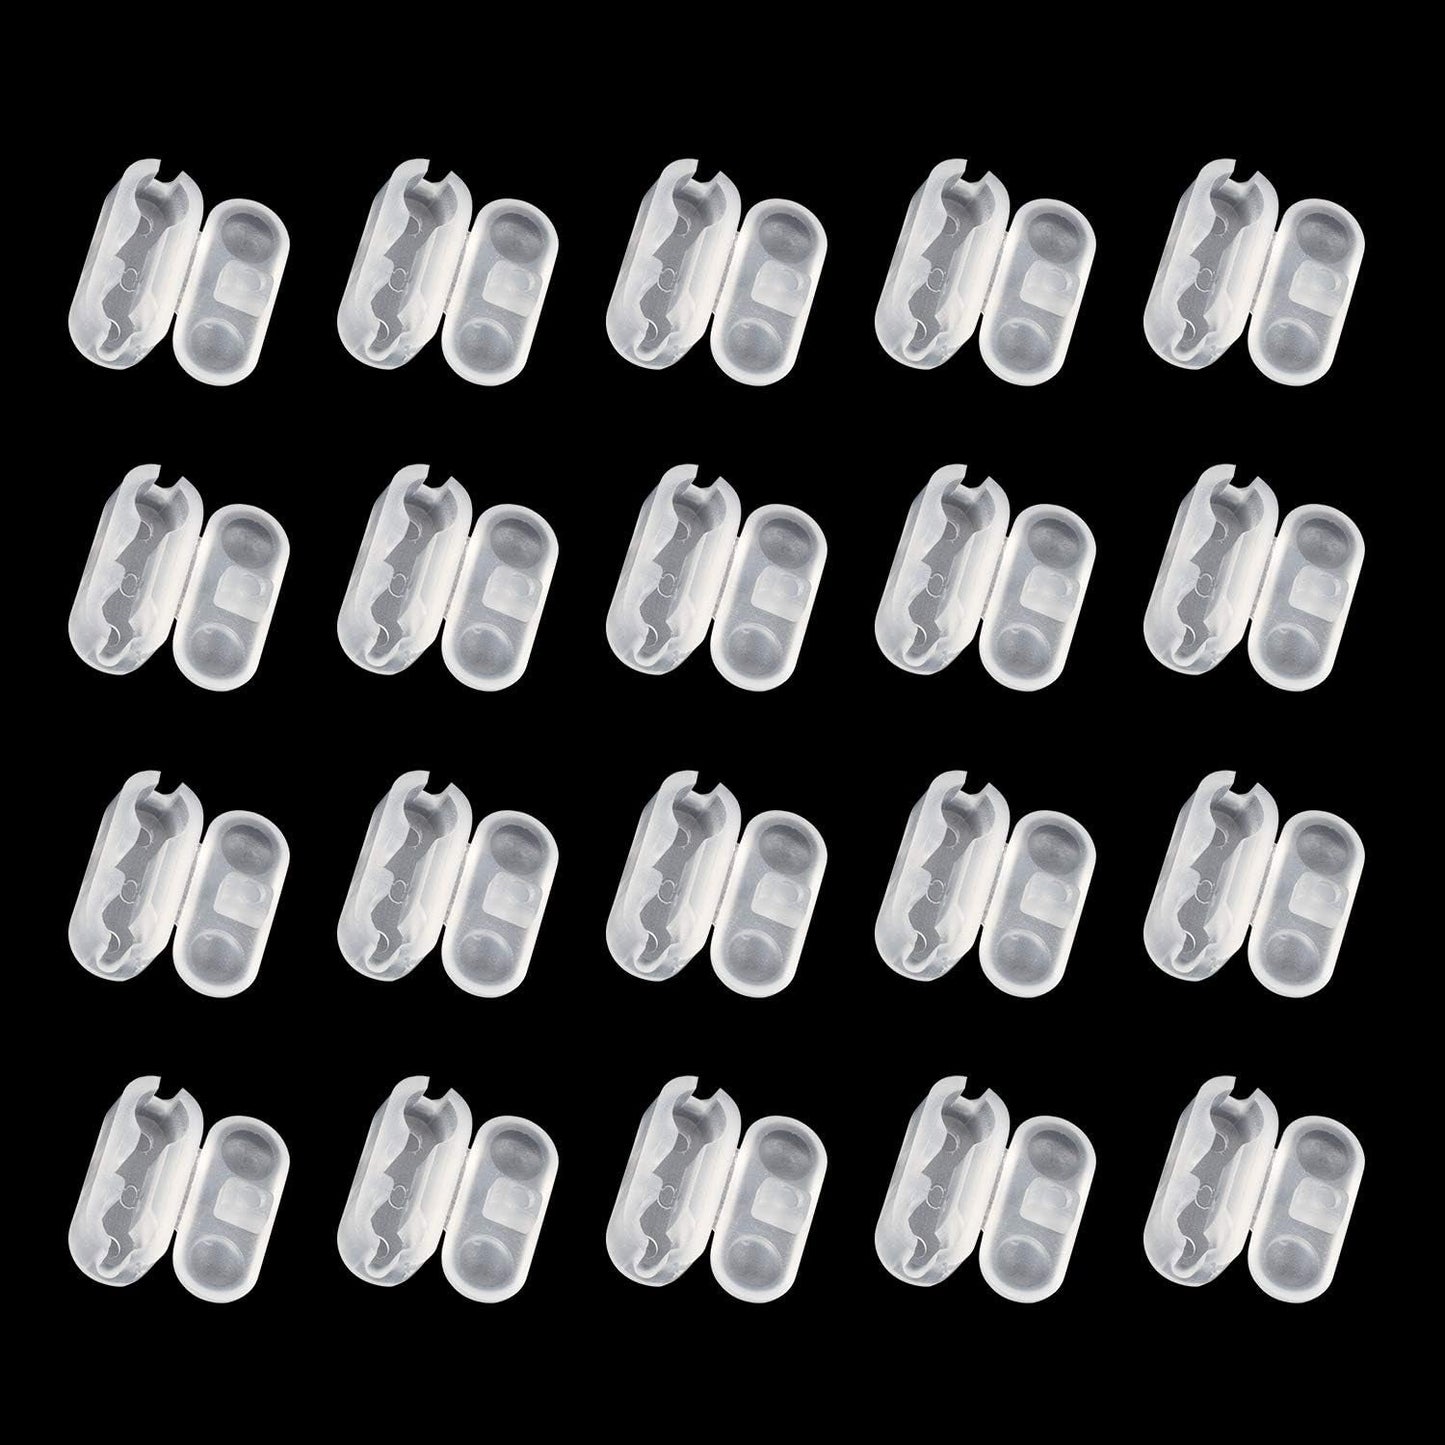 PAGOW Plastic Chain Connector, 20Pcs Replacement Vertical Roman Roller Blind Ball Chain Cord Connector Clips, Beaded Chain for Roller Shades and Vertical Blinds